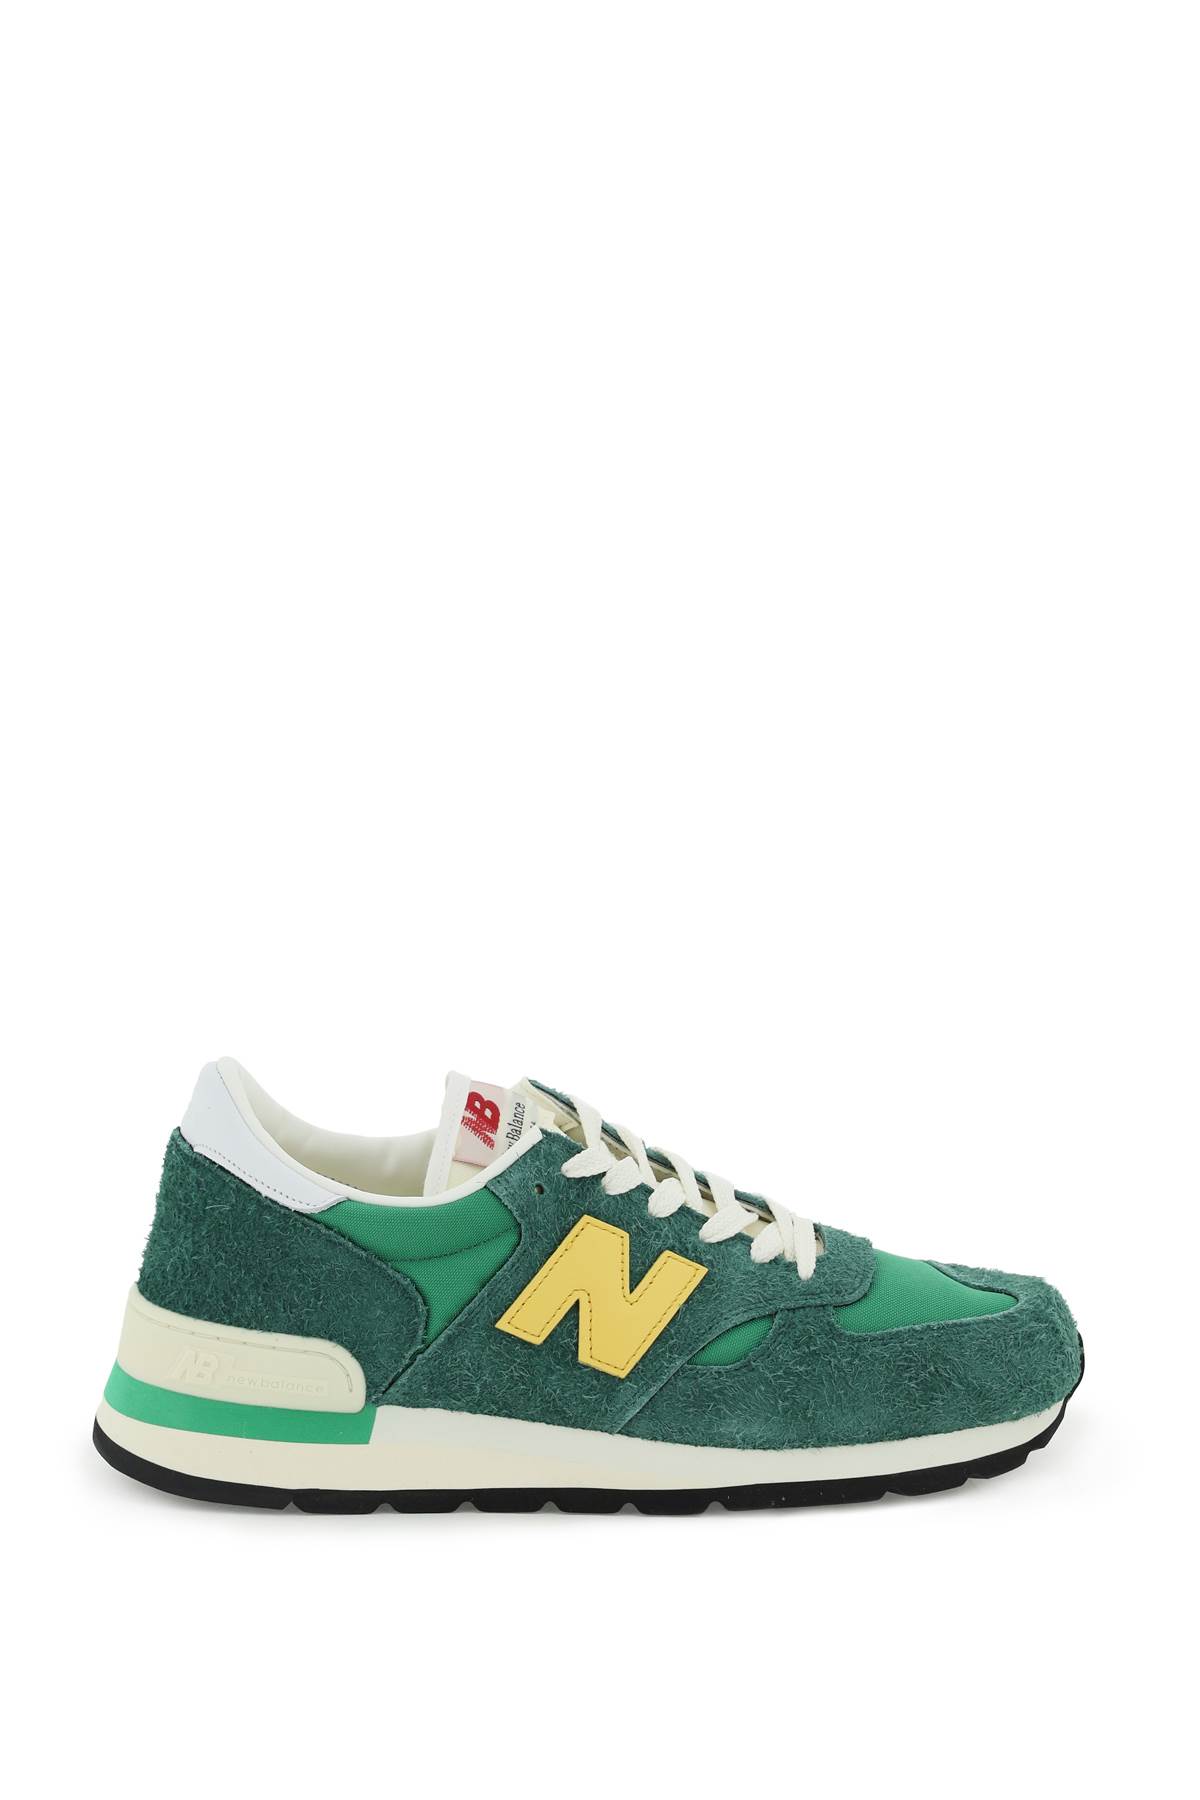 New Balance Made In U.s.a 990v1sneakers - 40th Anniversary